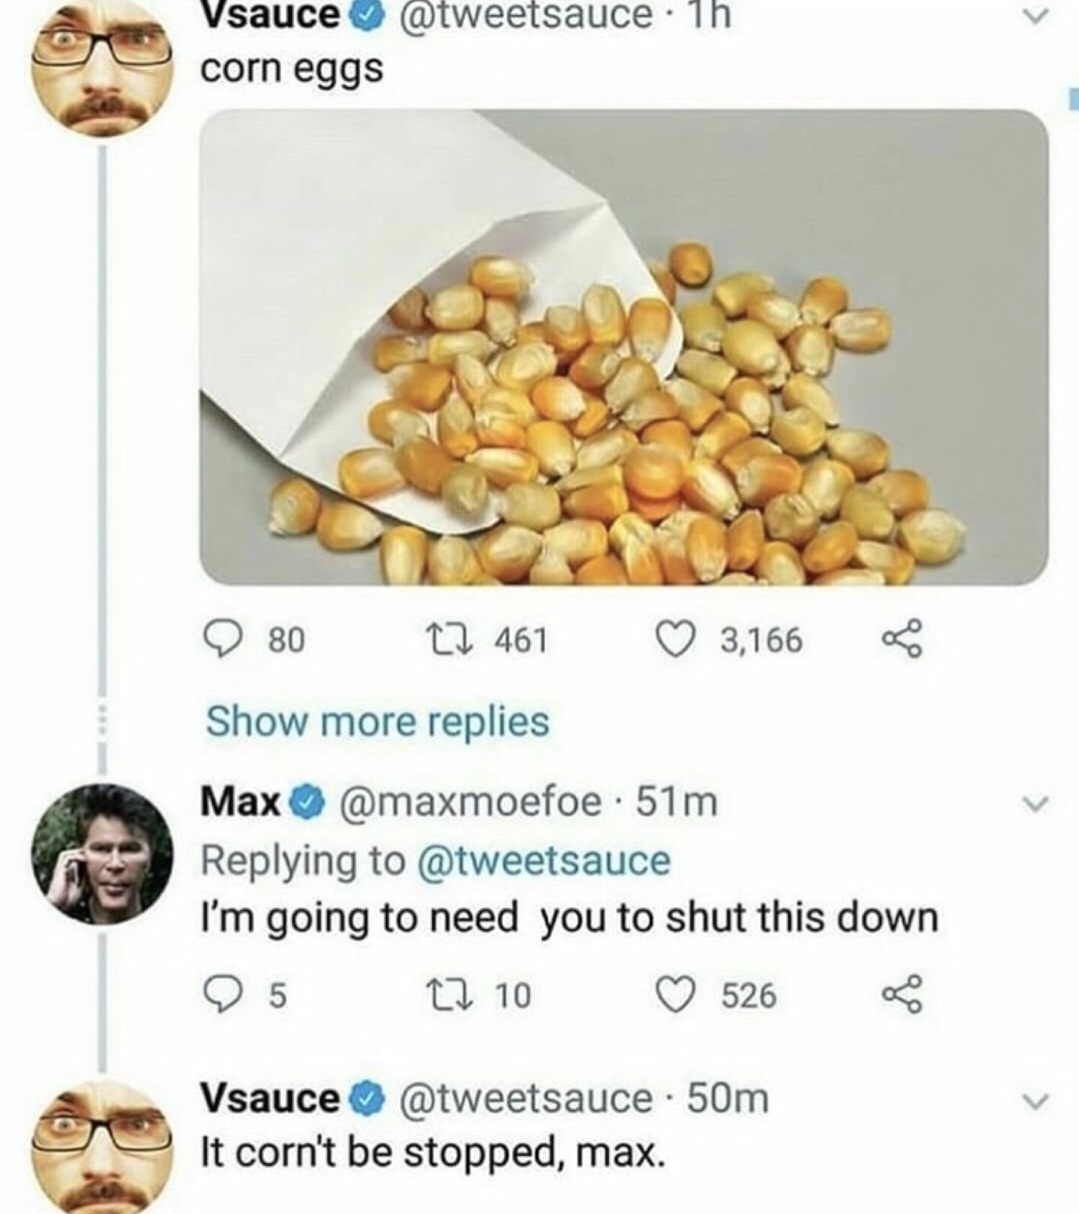 meme stream - vsauce corn meme - . 1h Vsauce corn eggs O 80 C2 461 3,166 Show more replies Max . 51m I'm going to need you to shut this down 95 210 526 Vsauce . 50m It corn't be stopped, max.